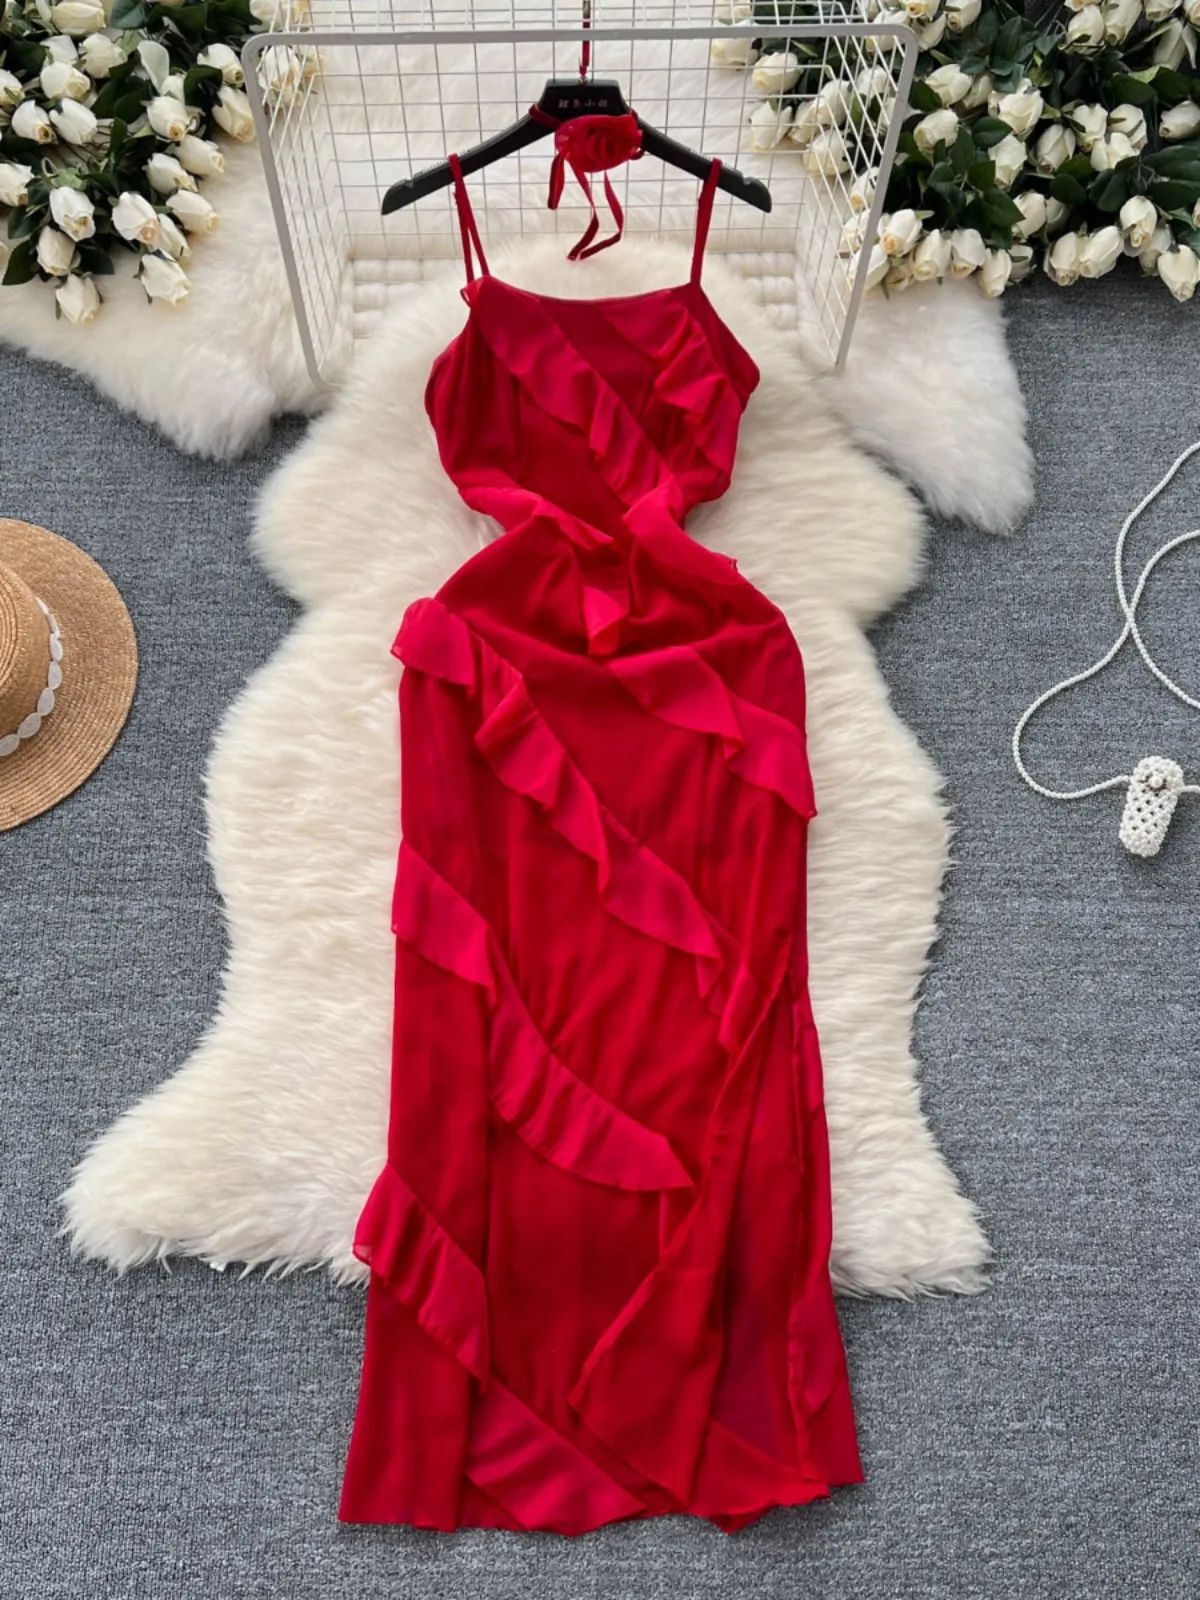 Red mini dress for women on beach vacation, summer outfit with a sense of atmosphere. Goddess style slit ruffle strap dress